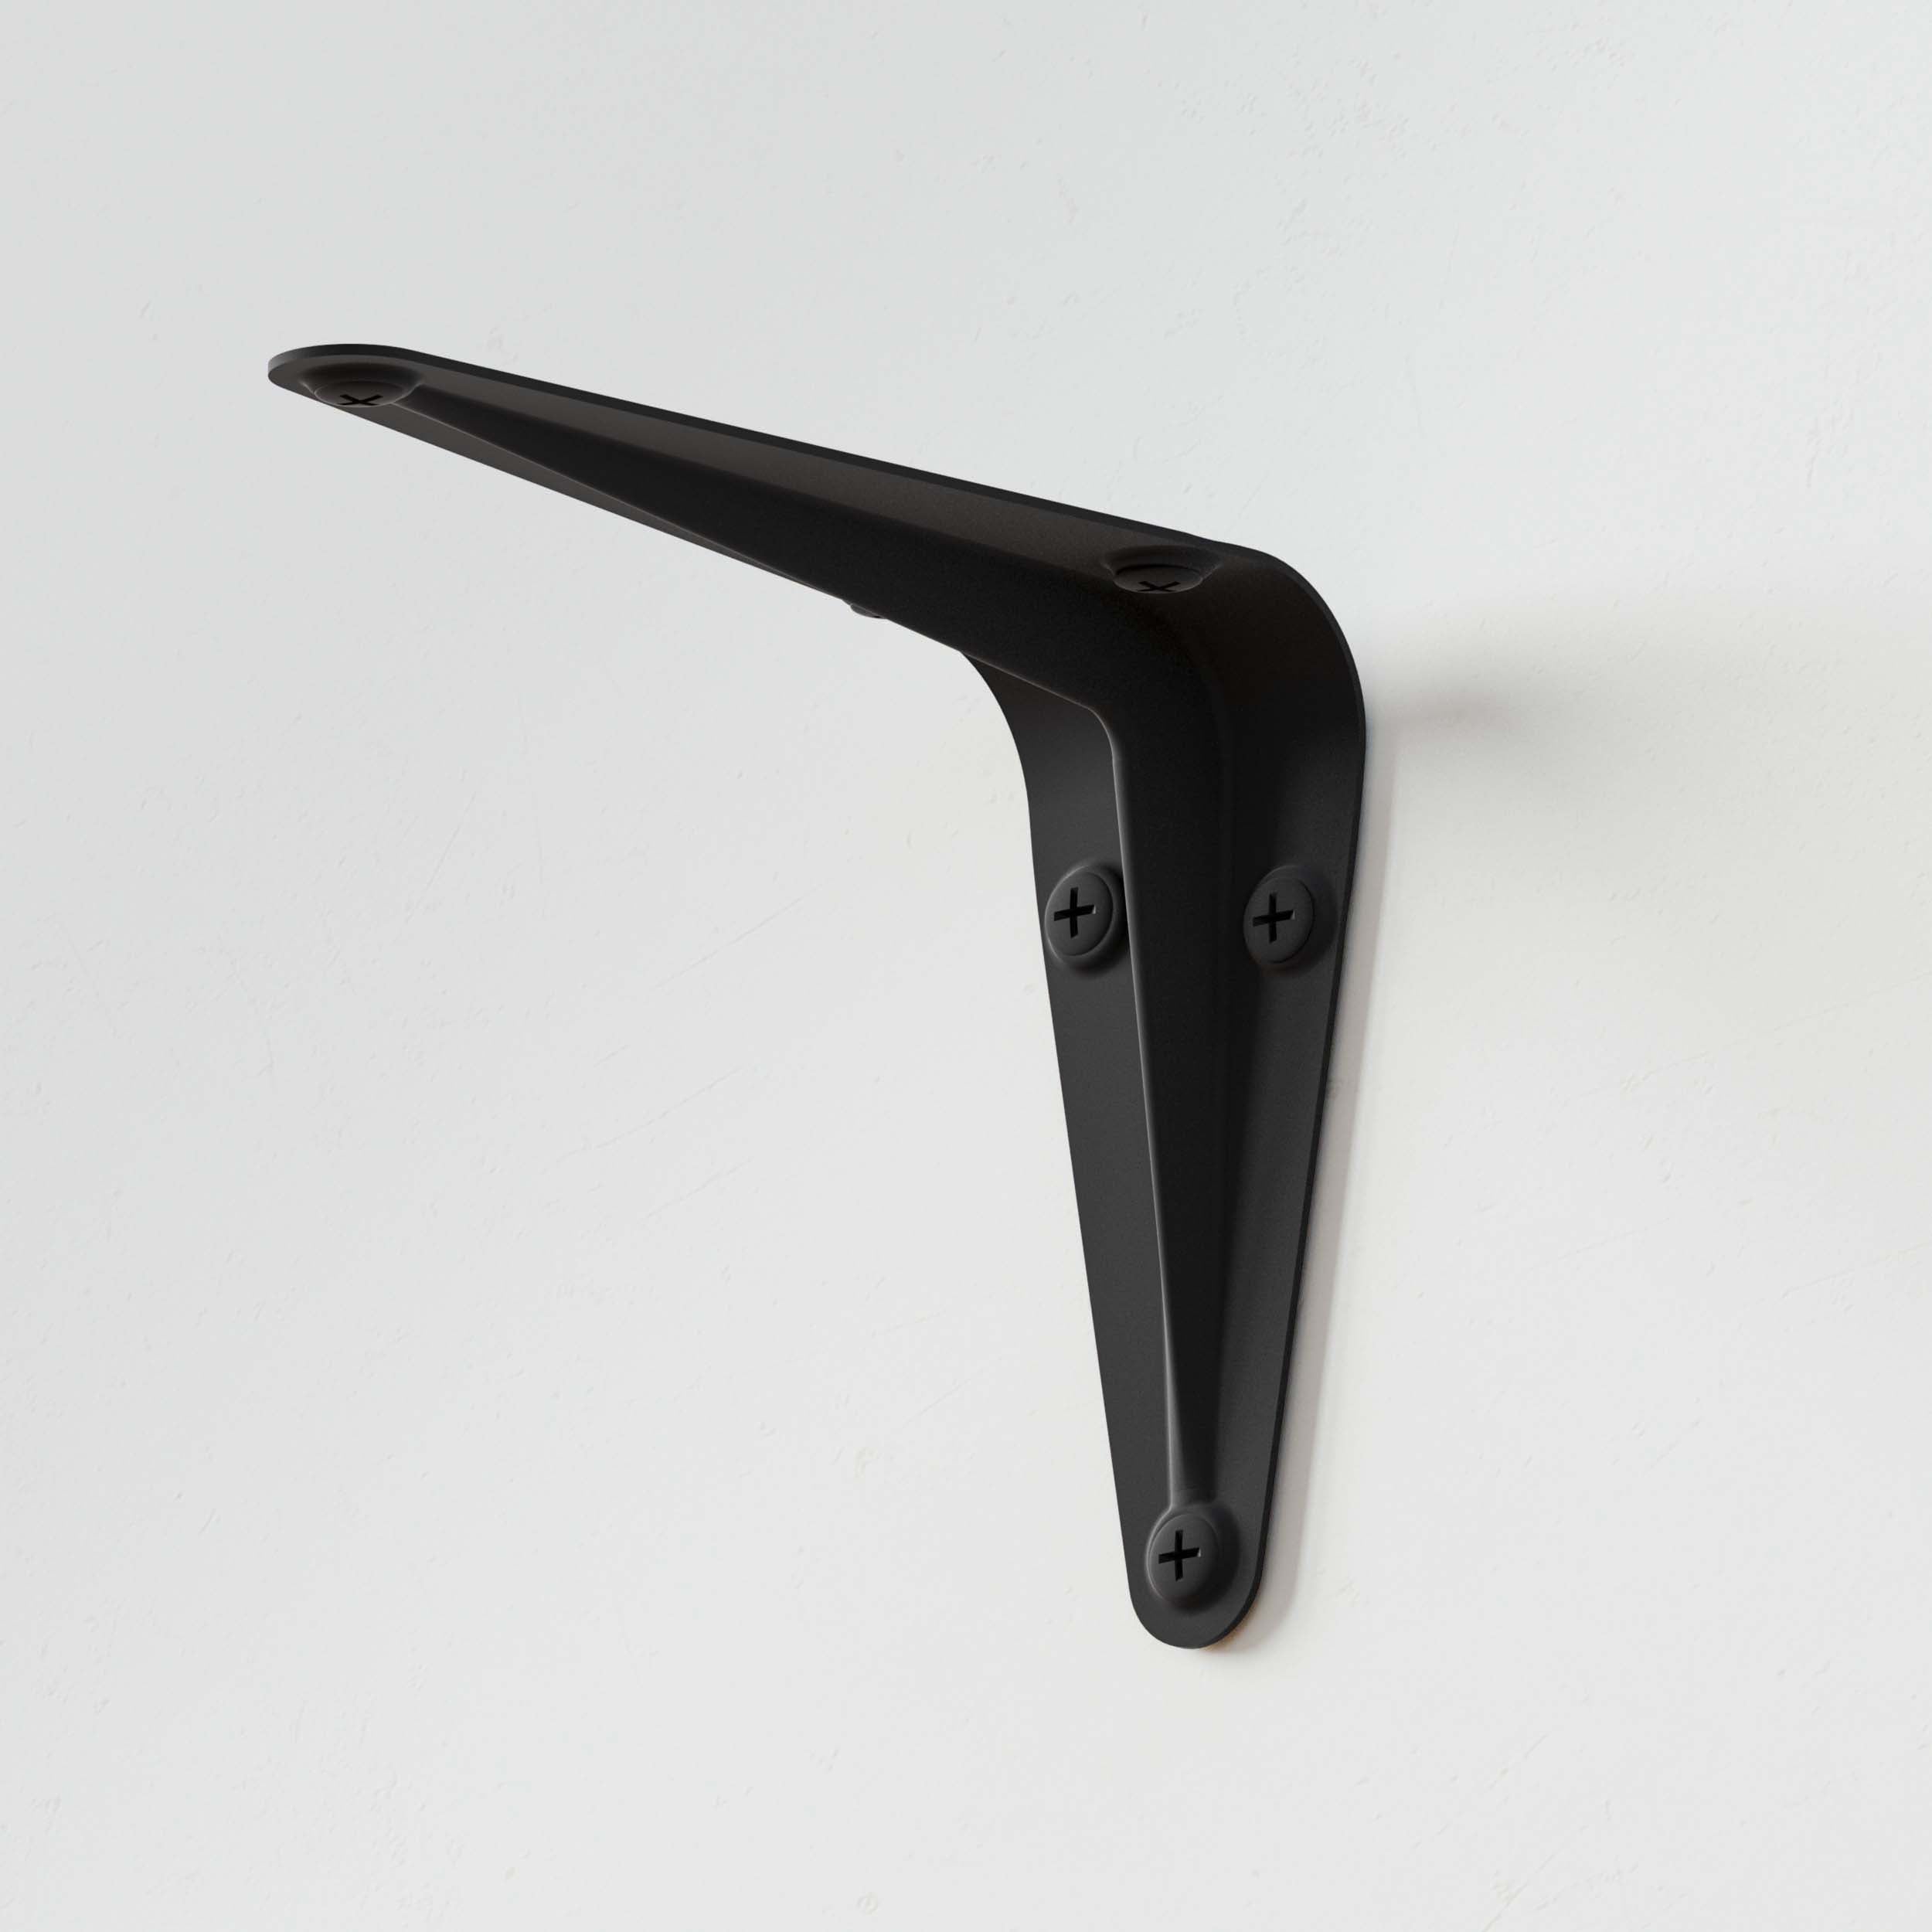 Single black metal bracket for wall-mounted shelves, ideal for home decor and storage solutions.